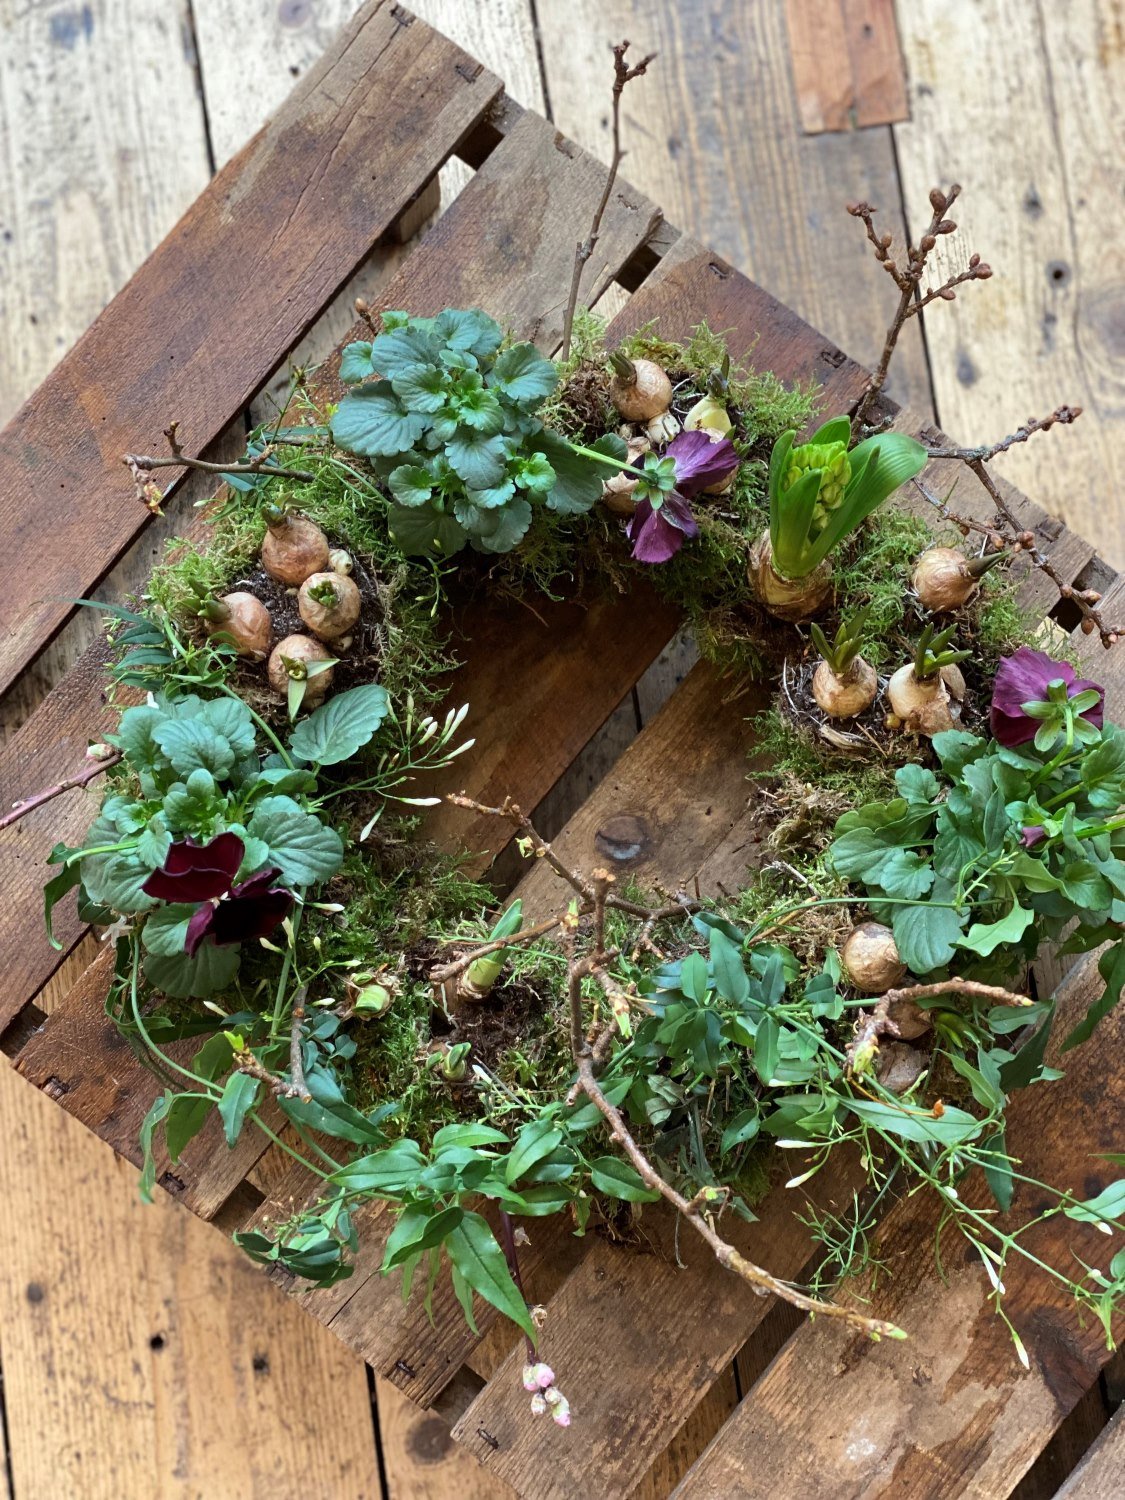 Naturally styled planted wreath displayed on a wooden apple crate